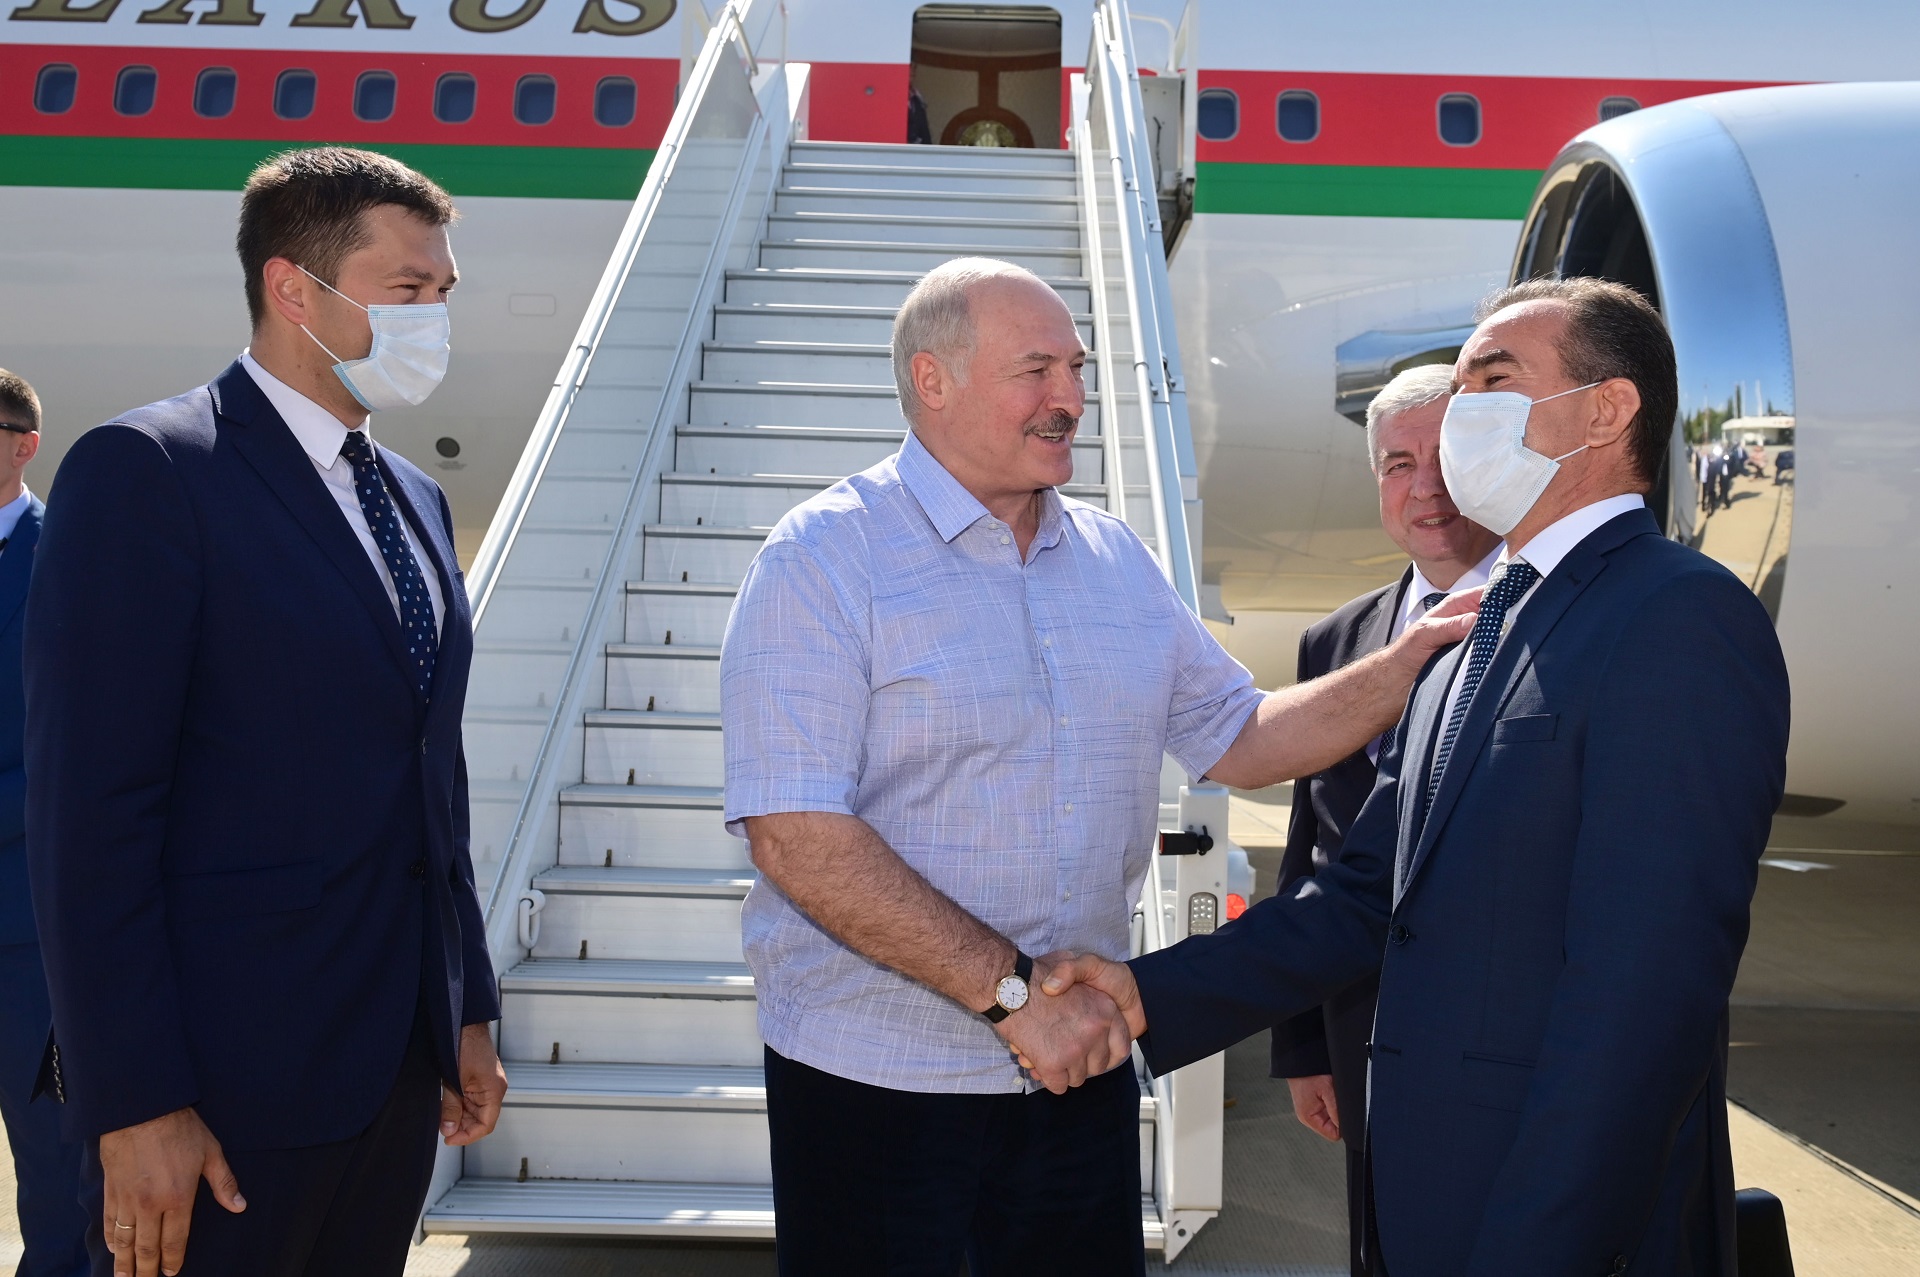 epa08668278 Belarusian President Alexander Lukashenko (C) is welcomed by officials as he disembarks from a government plane upon his arrival at the Black Sea resort of Sochi, Russia, 14 September 2020. Lukashenko is in Sochi for the first fcae-to-face talks with Russian President Putin since Lukashenko's contested 09 August re-election and the subsequent and growing opposition protests.  EPA/ANDREI STASEVICH / BELTA POOL / POOL MANDATORY CREDIT